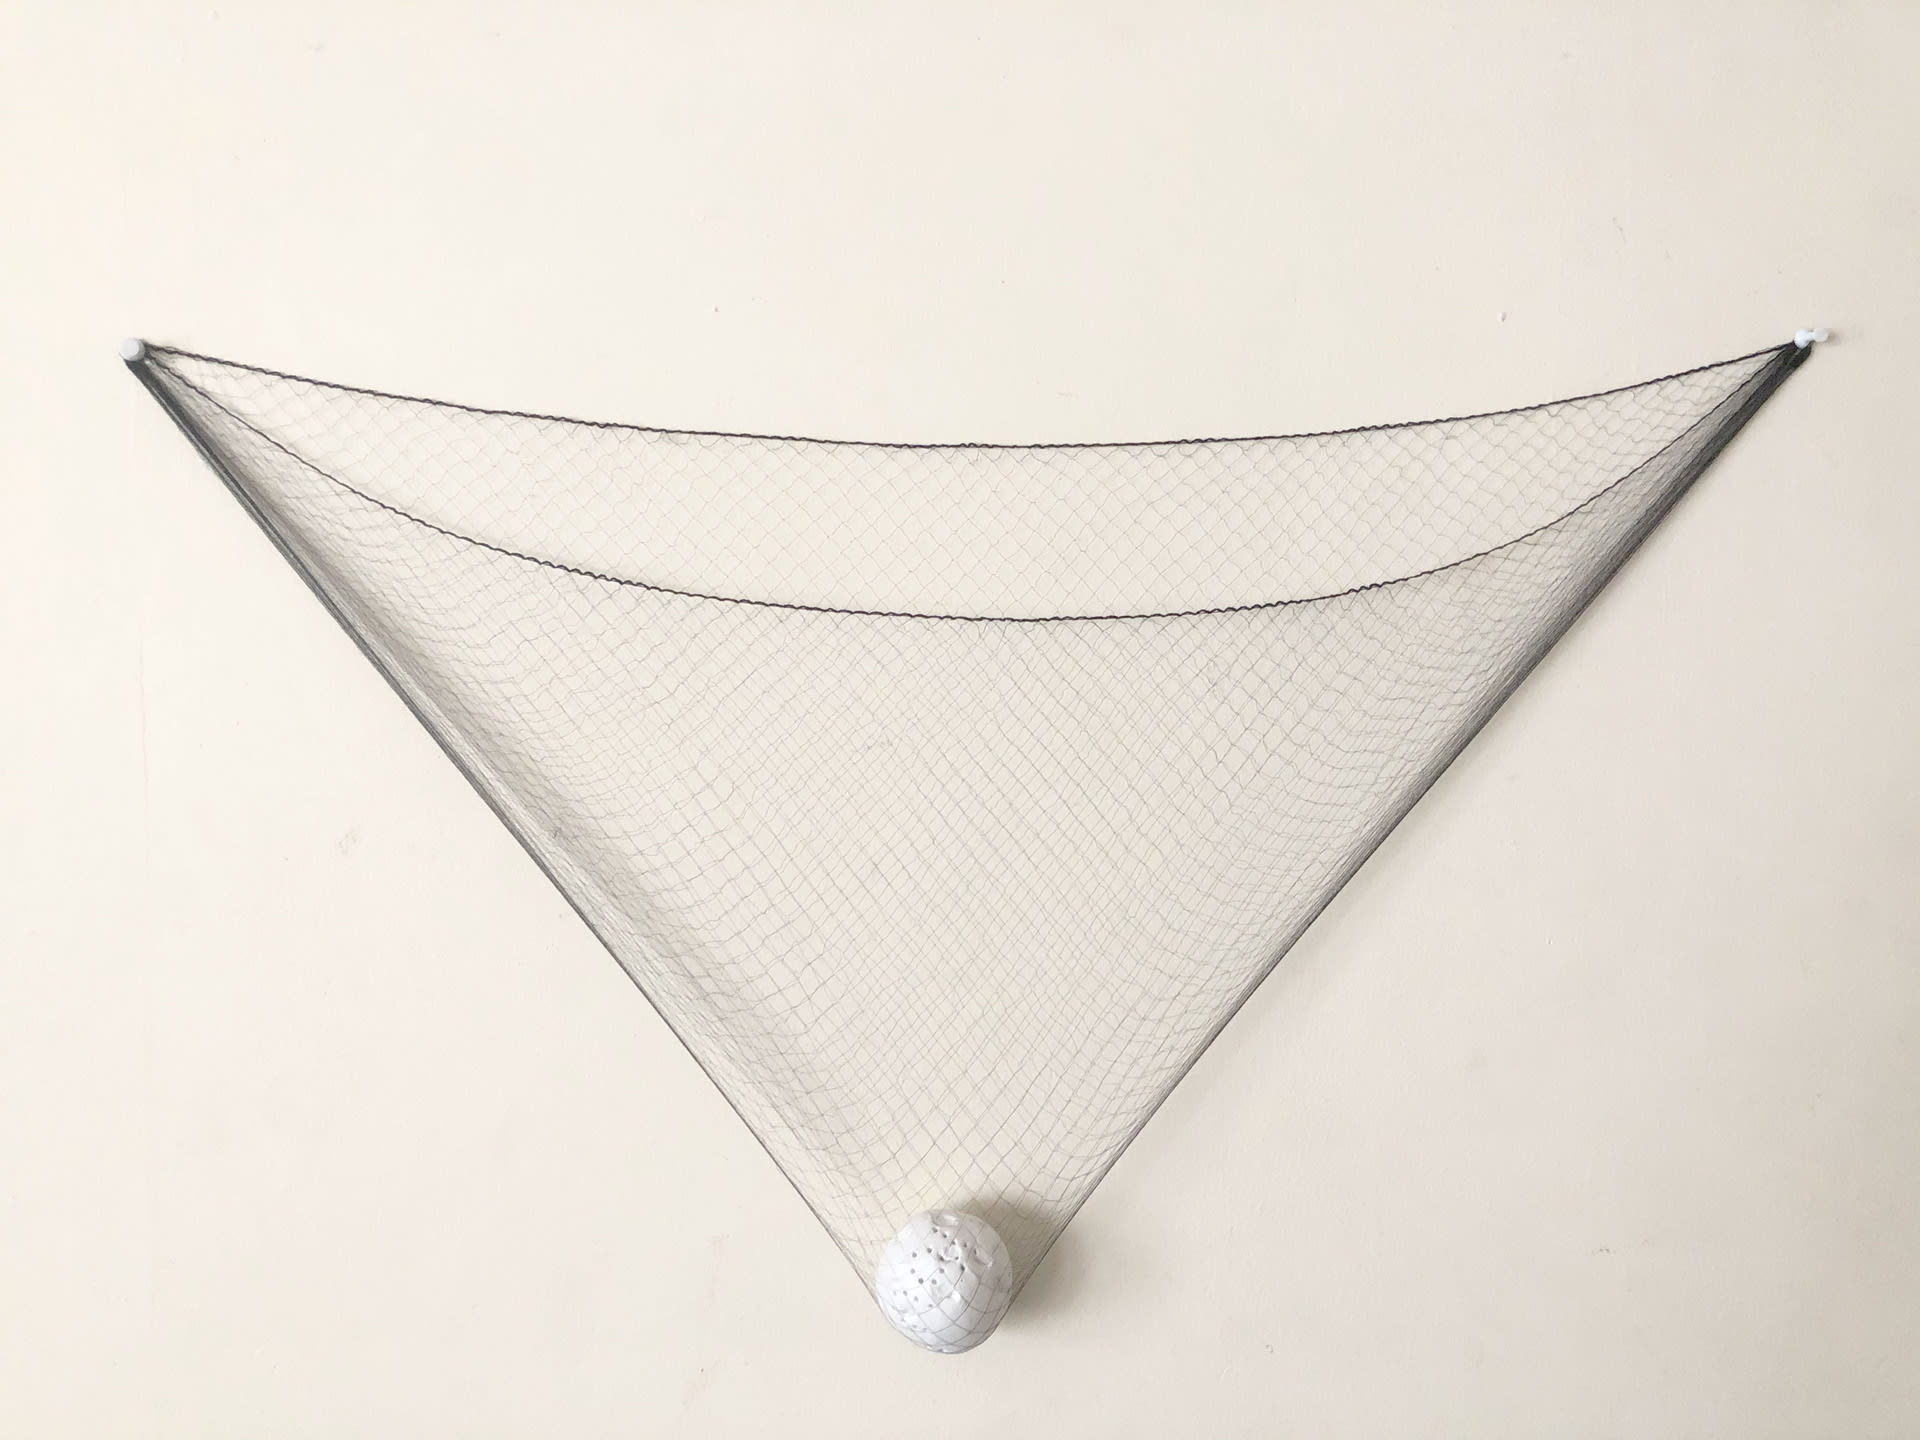 Stretched net held by white plastic pins weighed down into a triangle shape by punctured ball